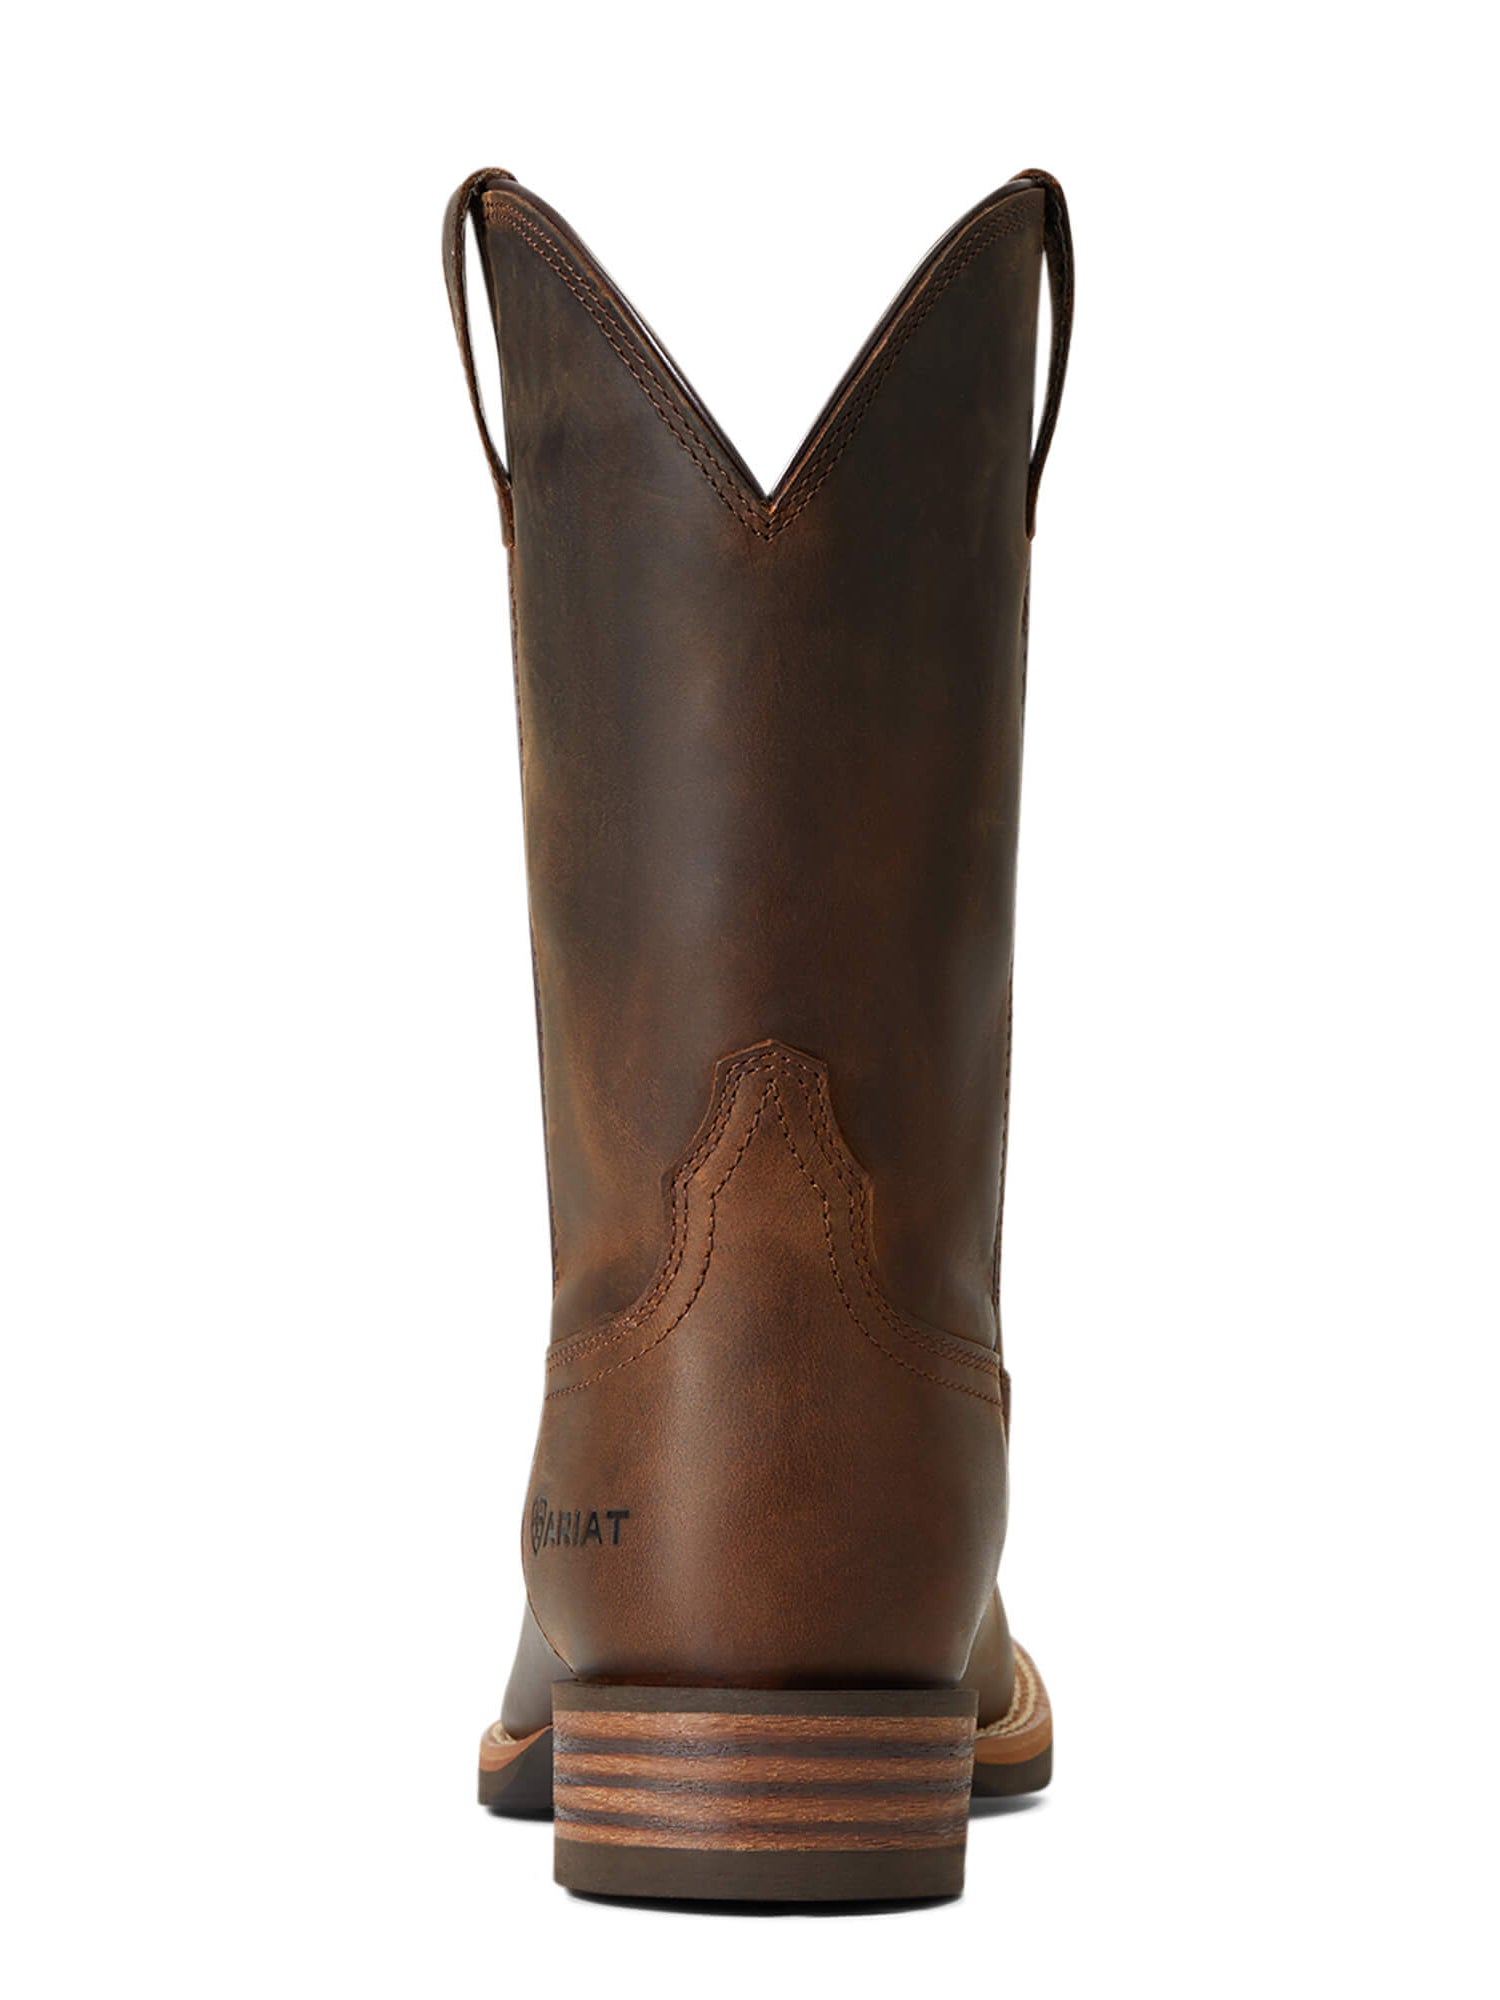 Ariat 10040419 Hybrid Fly High Western Boot Heel View